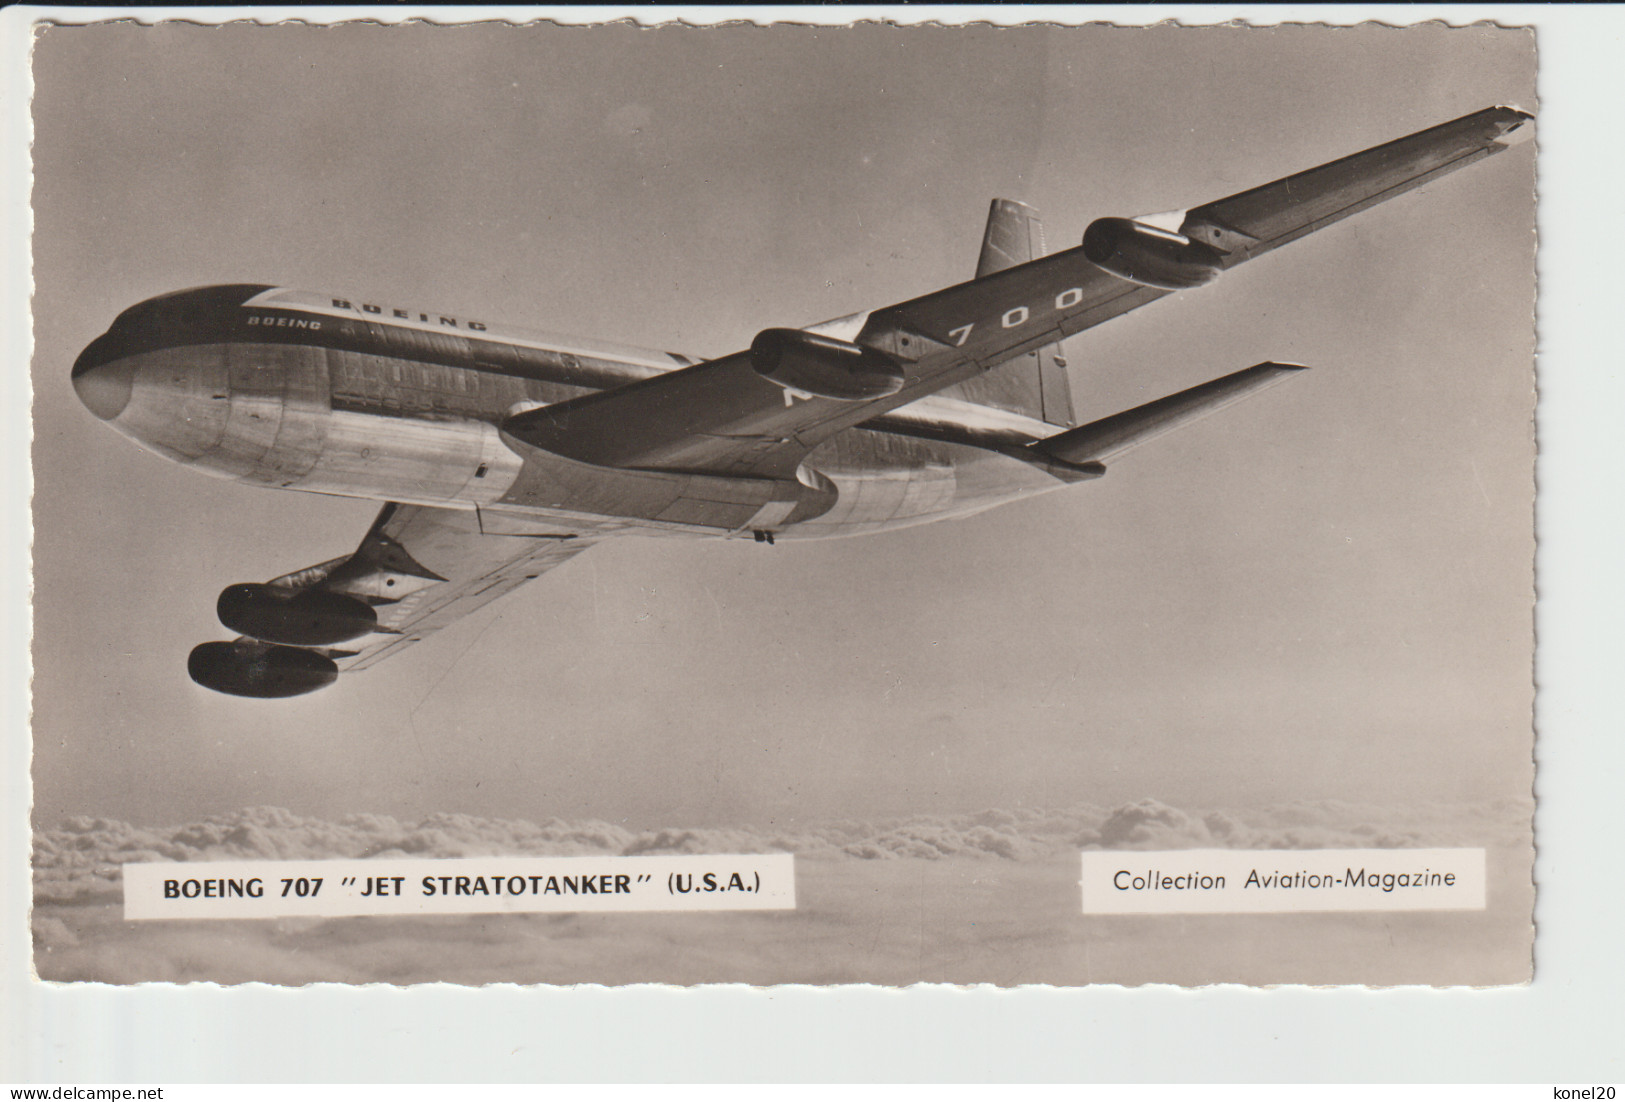 Vintage Card Boeing 707 Jet Aircraft In Company Colours Used By Sabena, Continental, TWA, Air France - 1919-1938: Between Wars